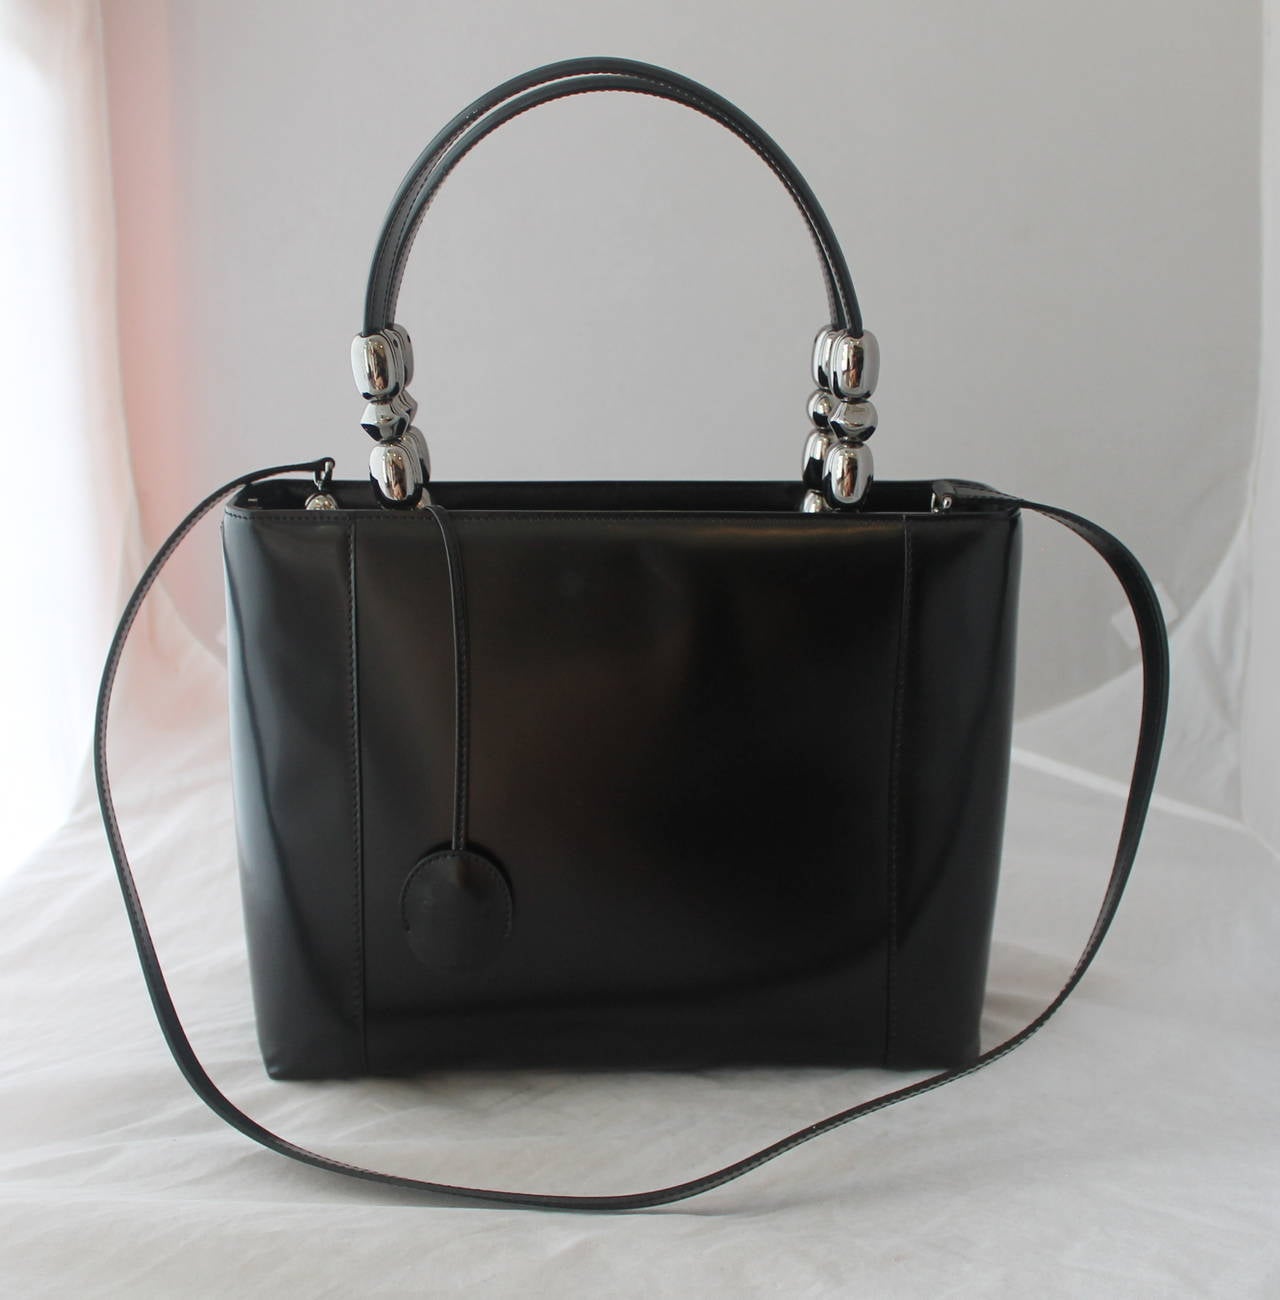 Christian Dior Black Leather Chrome Beaded Malice Tote. This handbag is in very good condition with the only issue being that it has one slight mark seen on image 2 in the upper portion of the bag. 

Measurements:
Height- 9